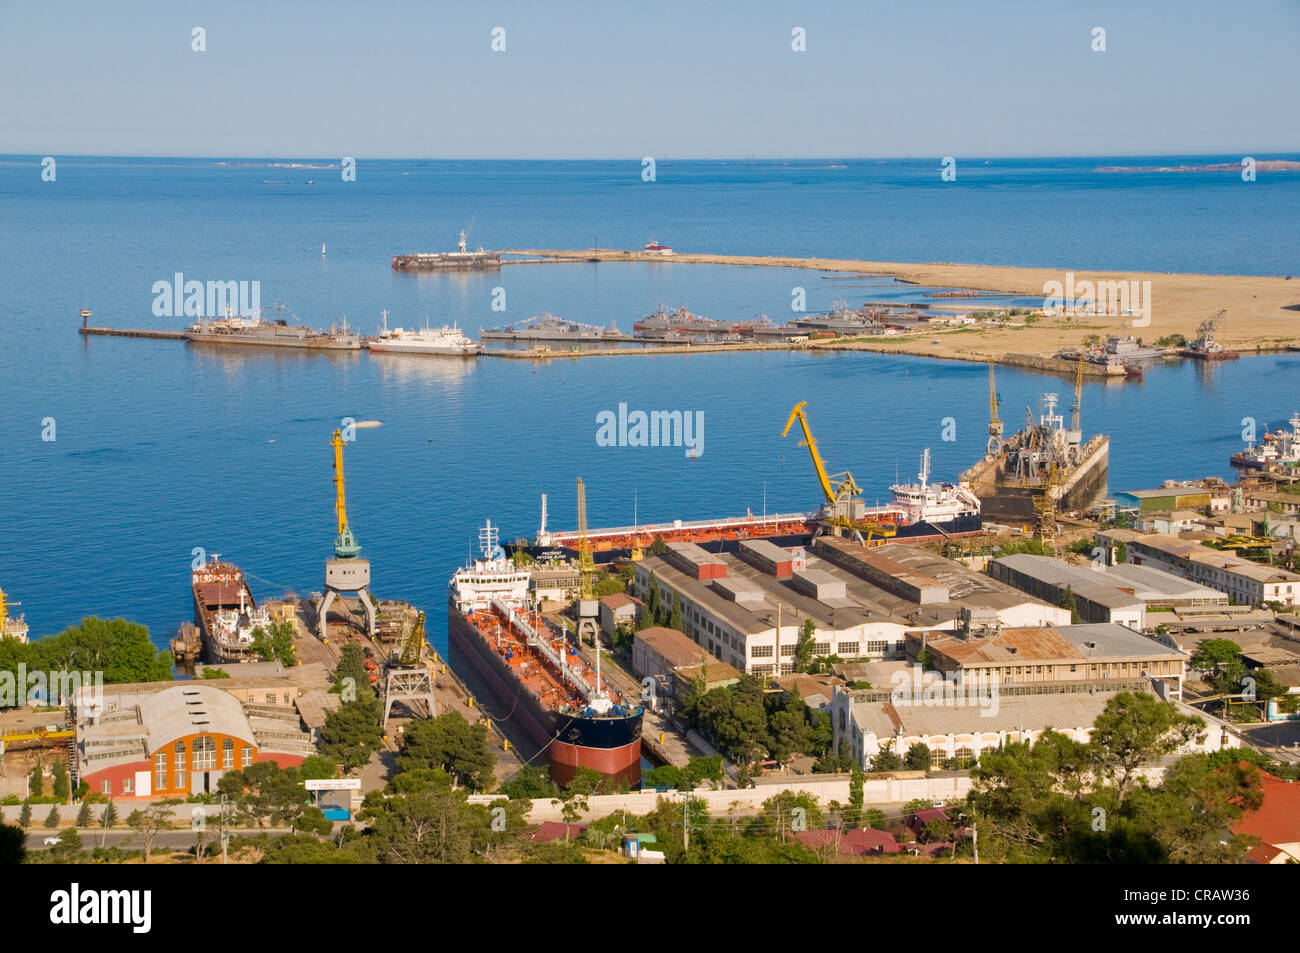 Baku Harbour with a container vessel, on the Caspian Sea, Azerbaijan, Caucasus region, Middle East Stock Photo